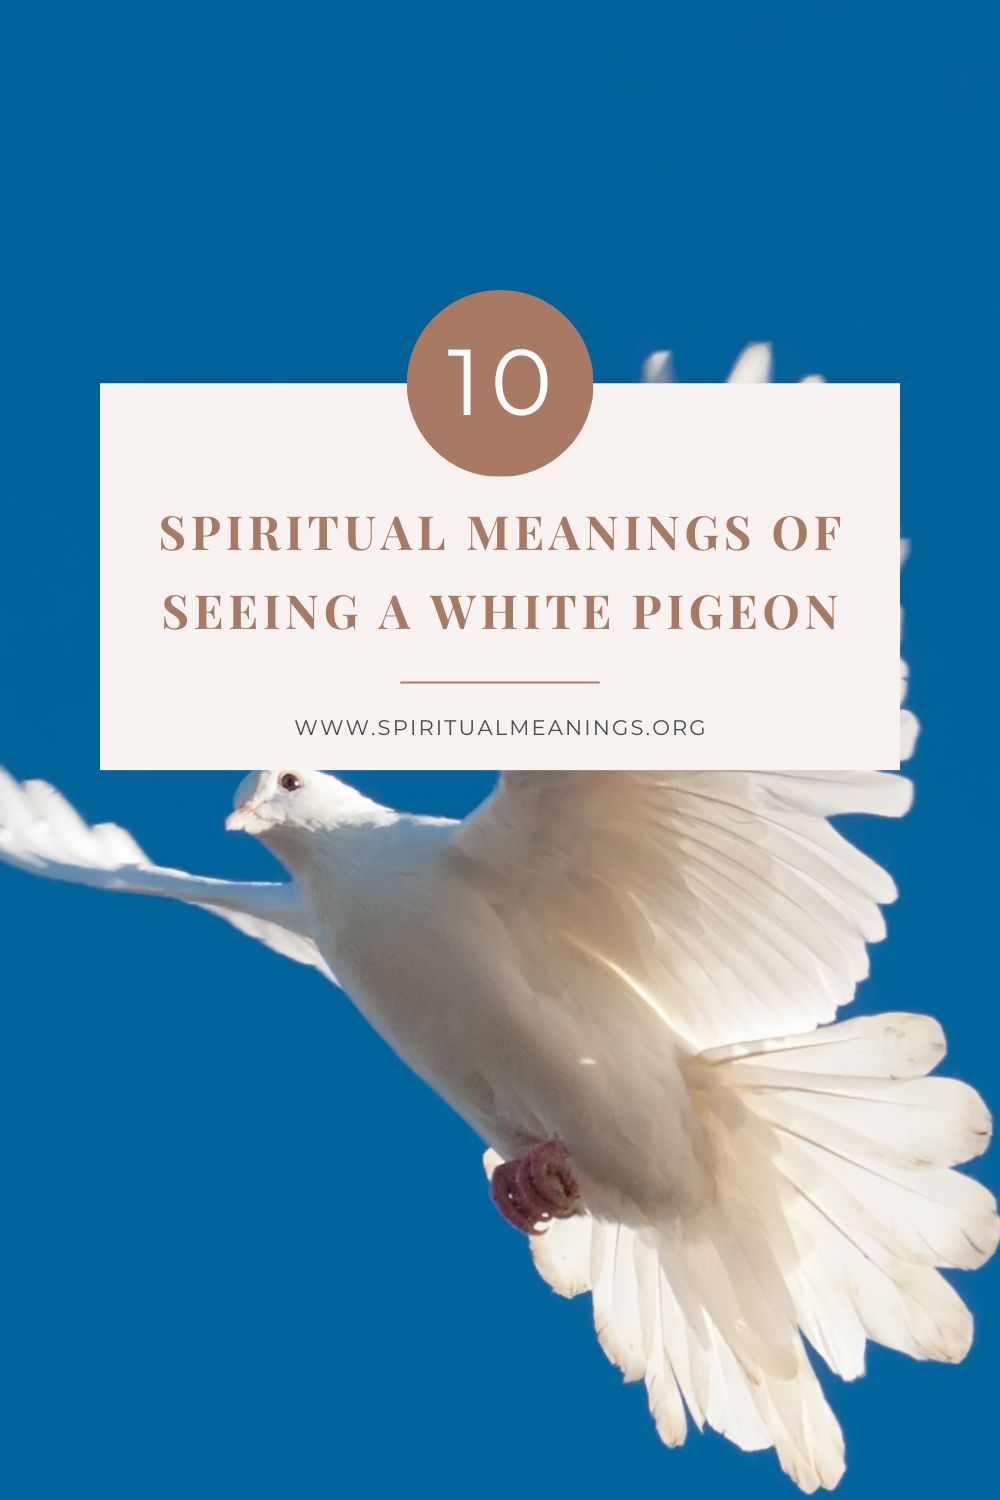 Why white pigeons are so special